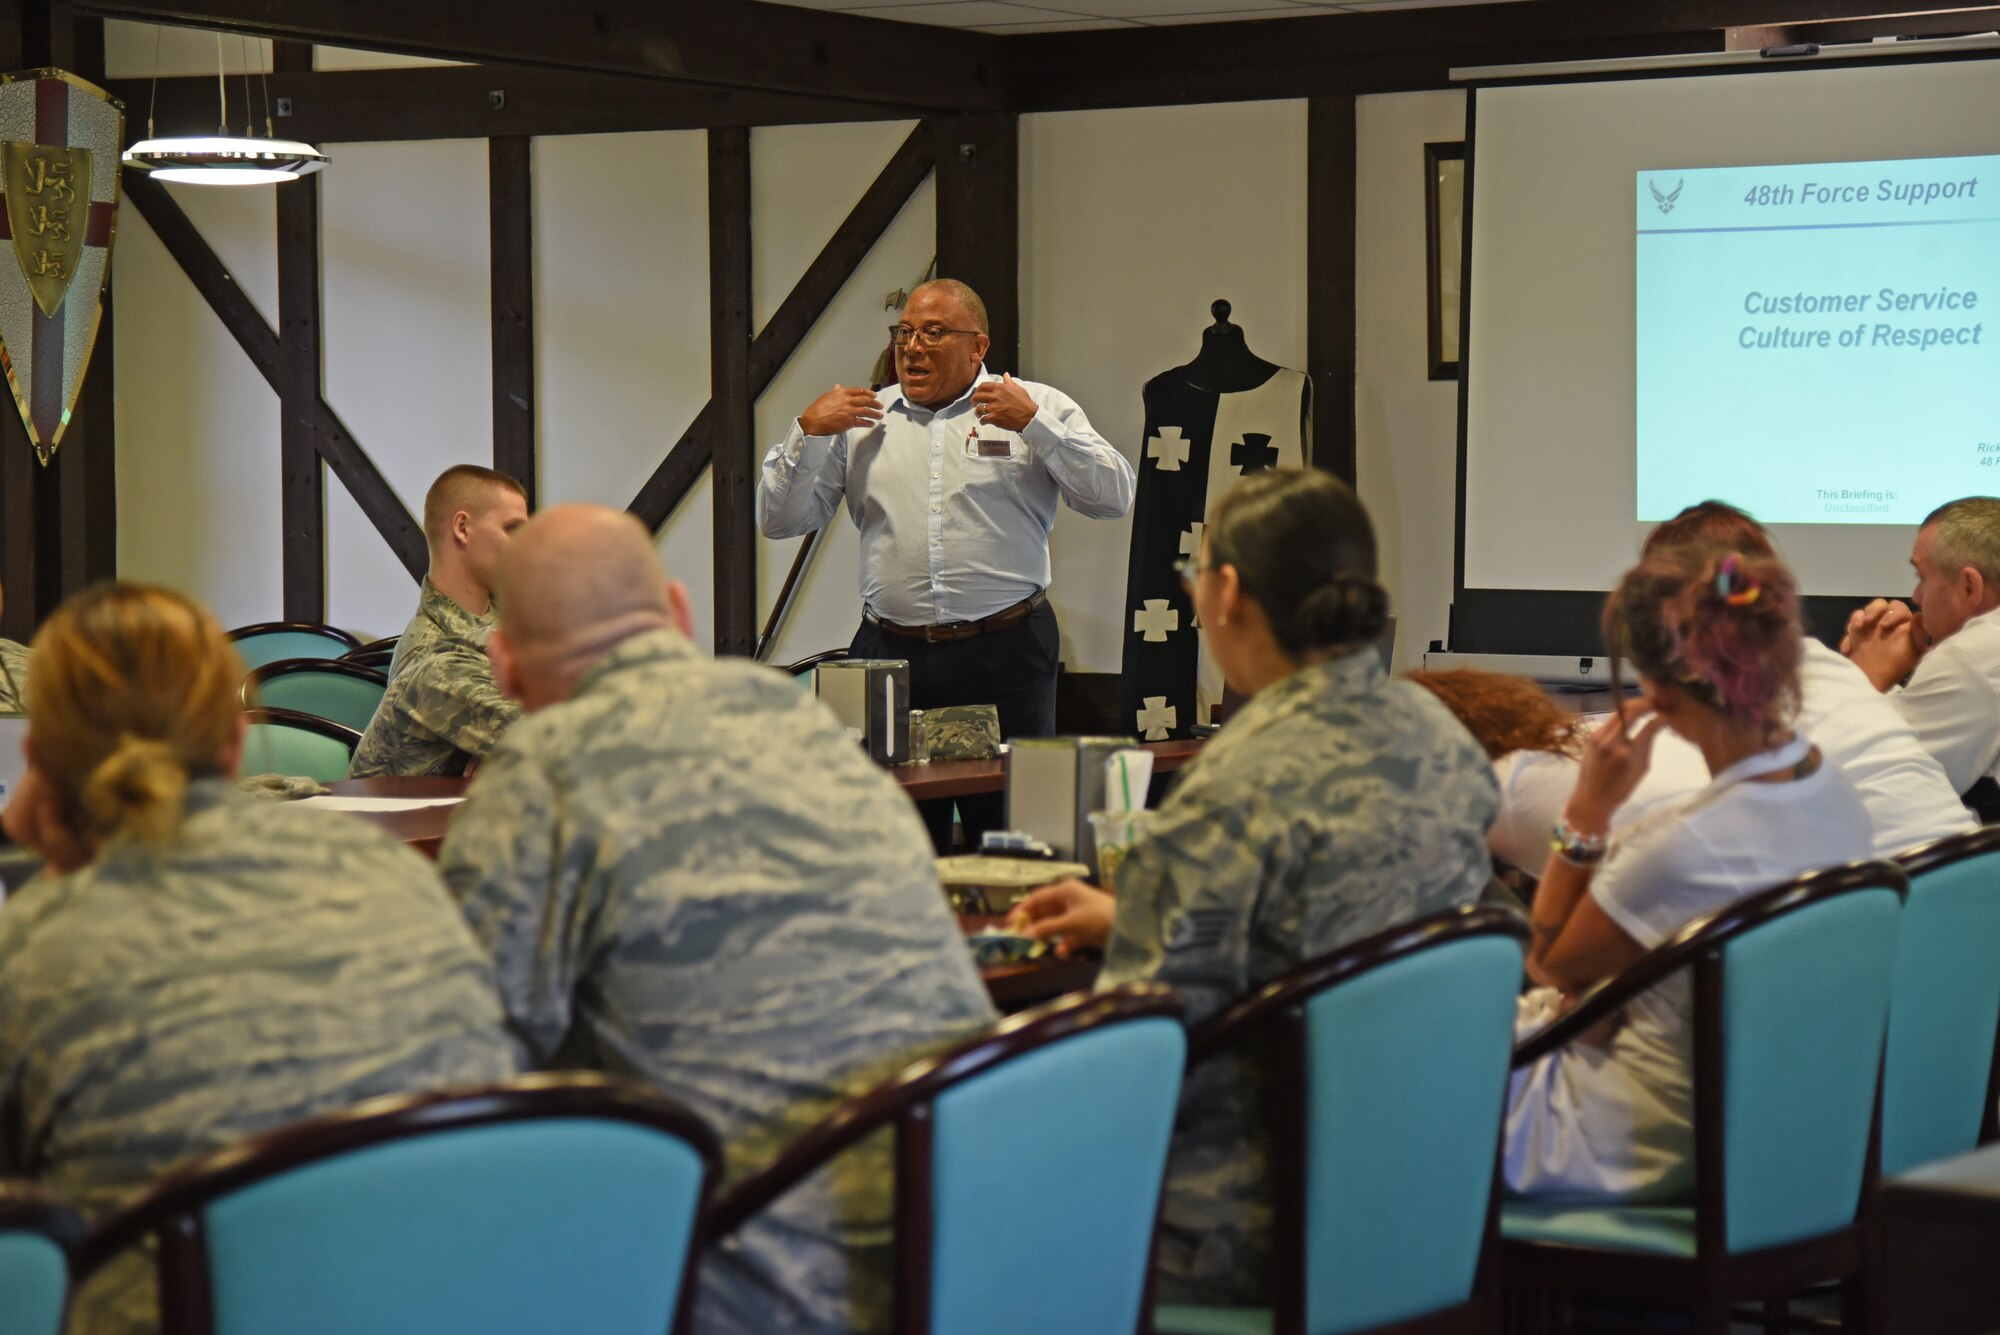 Airmen from the 161st and 48th Force Support Squadrons attend a customer service training course inside the Knights Table dining facility at Royal Air Force Lakenheath, England May 23, 2018. The 161st FSS Airmen spent two weeks training with members of the 48th FSS to gain valuable insight and knowledge of how daily operations are conducted at an overseas air base. (U.S. Air National Guard photo by Staff Sgt. Dillon Davis)